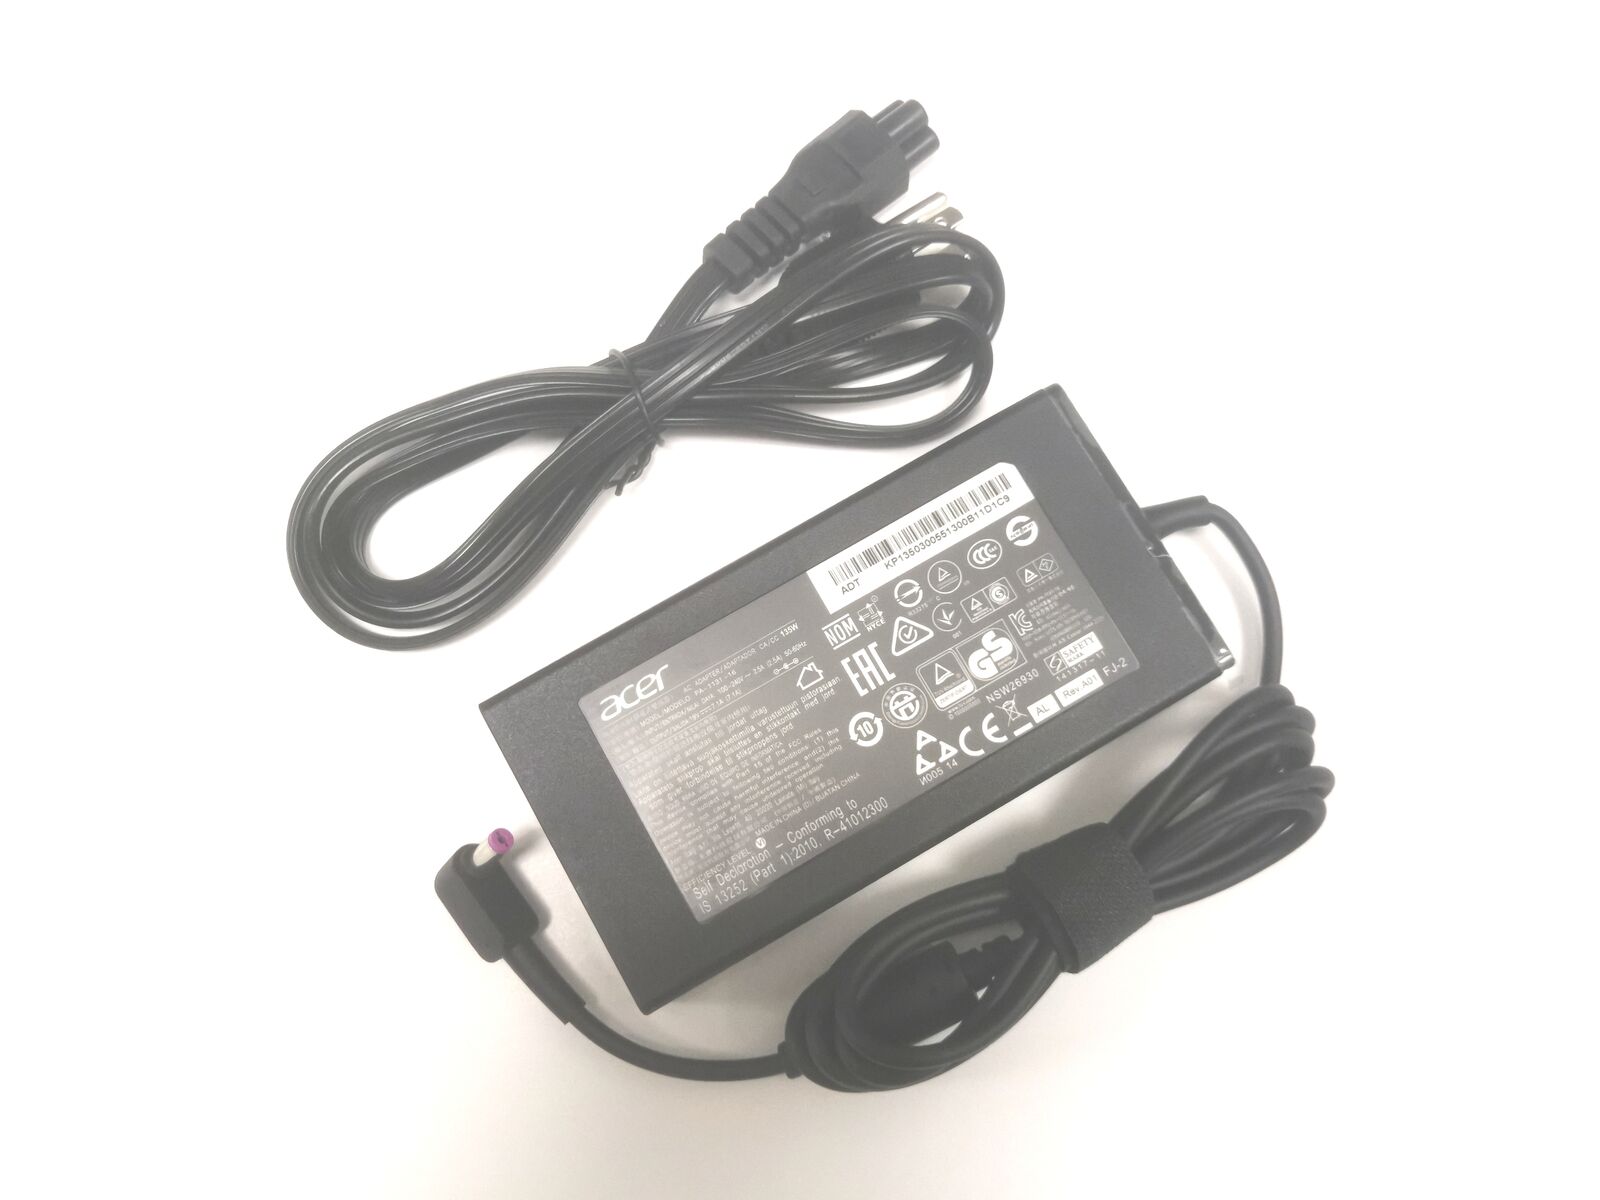 Original 135W Acer AC Power Adapter for Acer Nitro 5 AN515-57 AN517-54 w/P.Cord